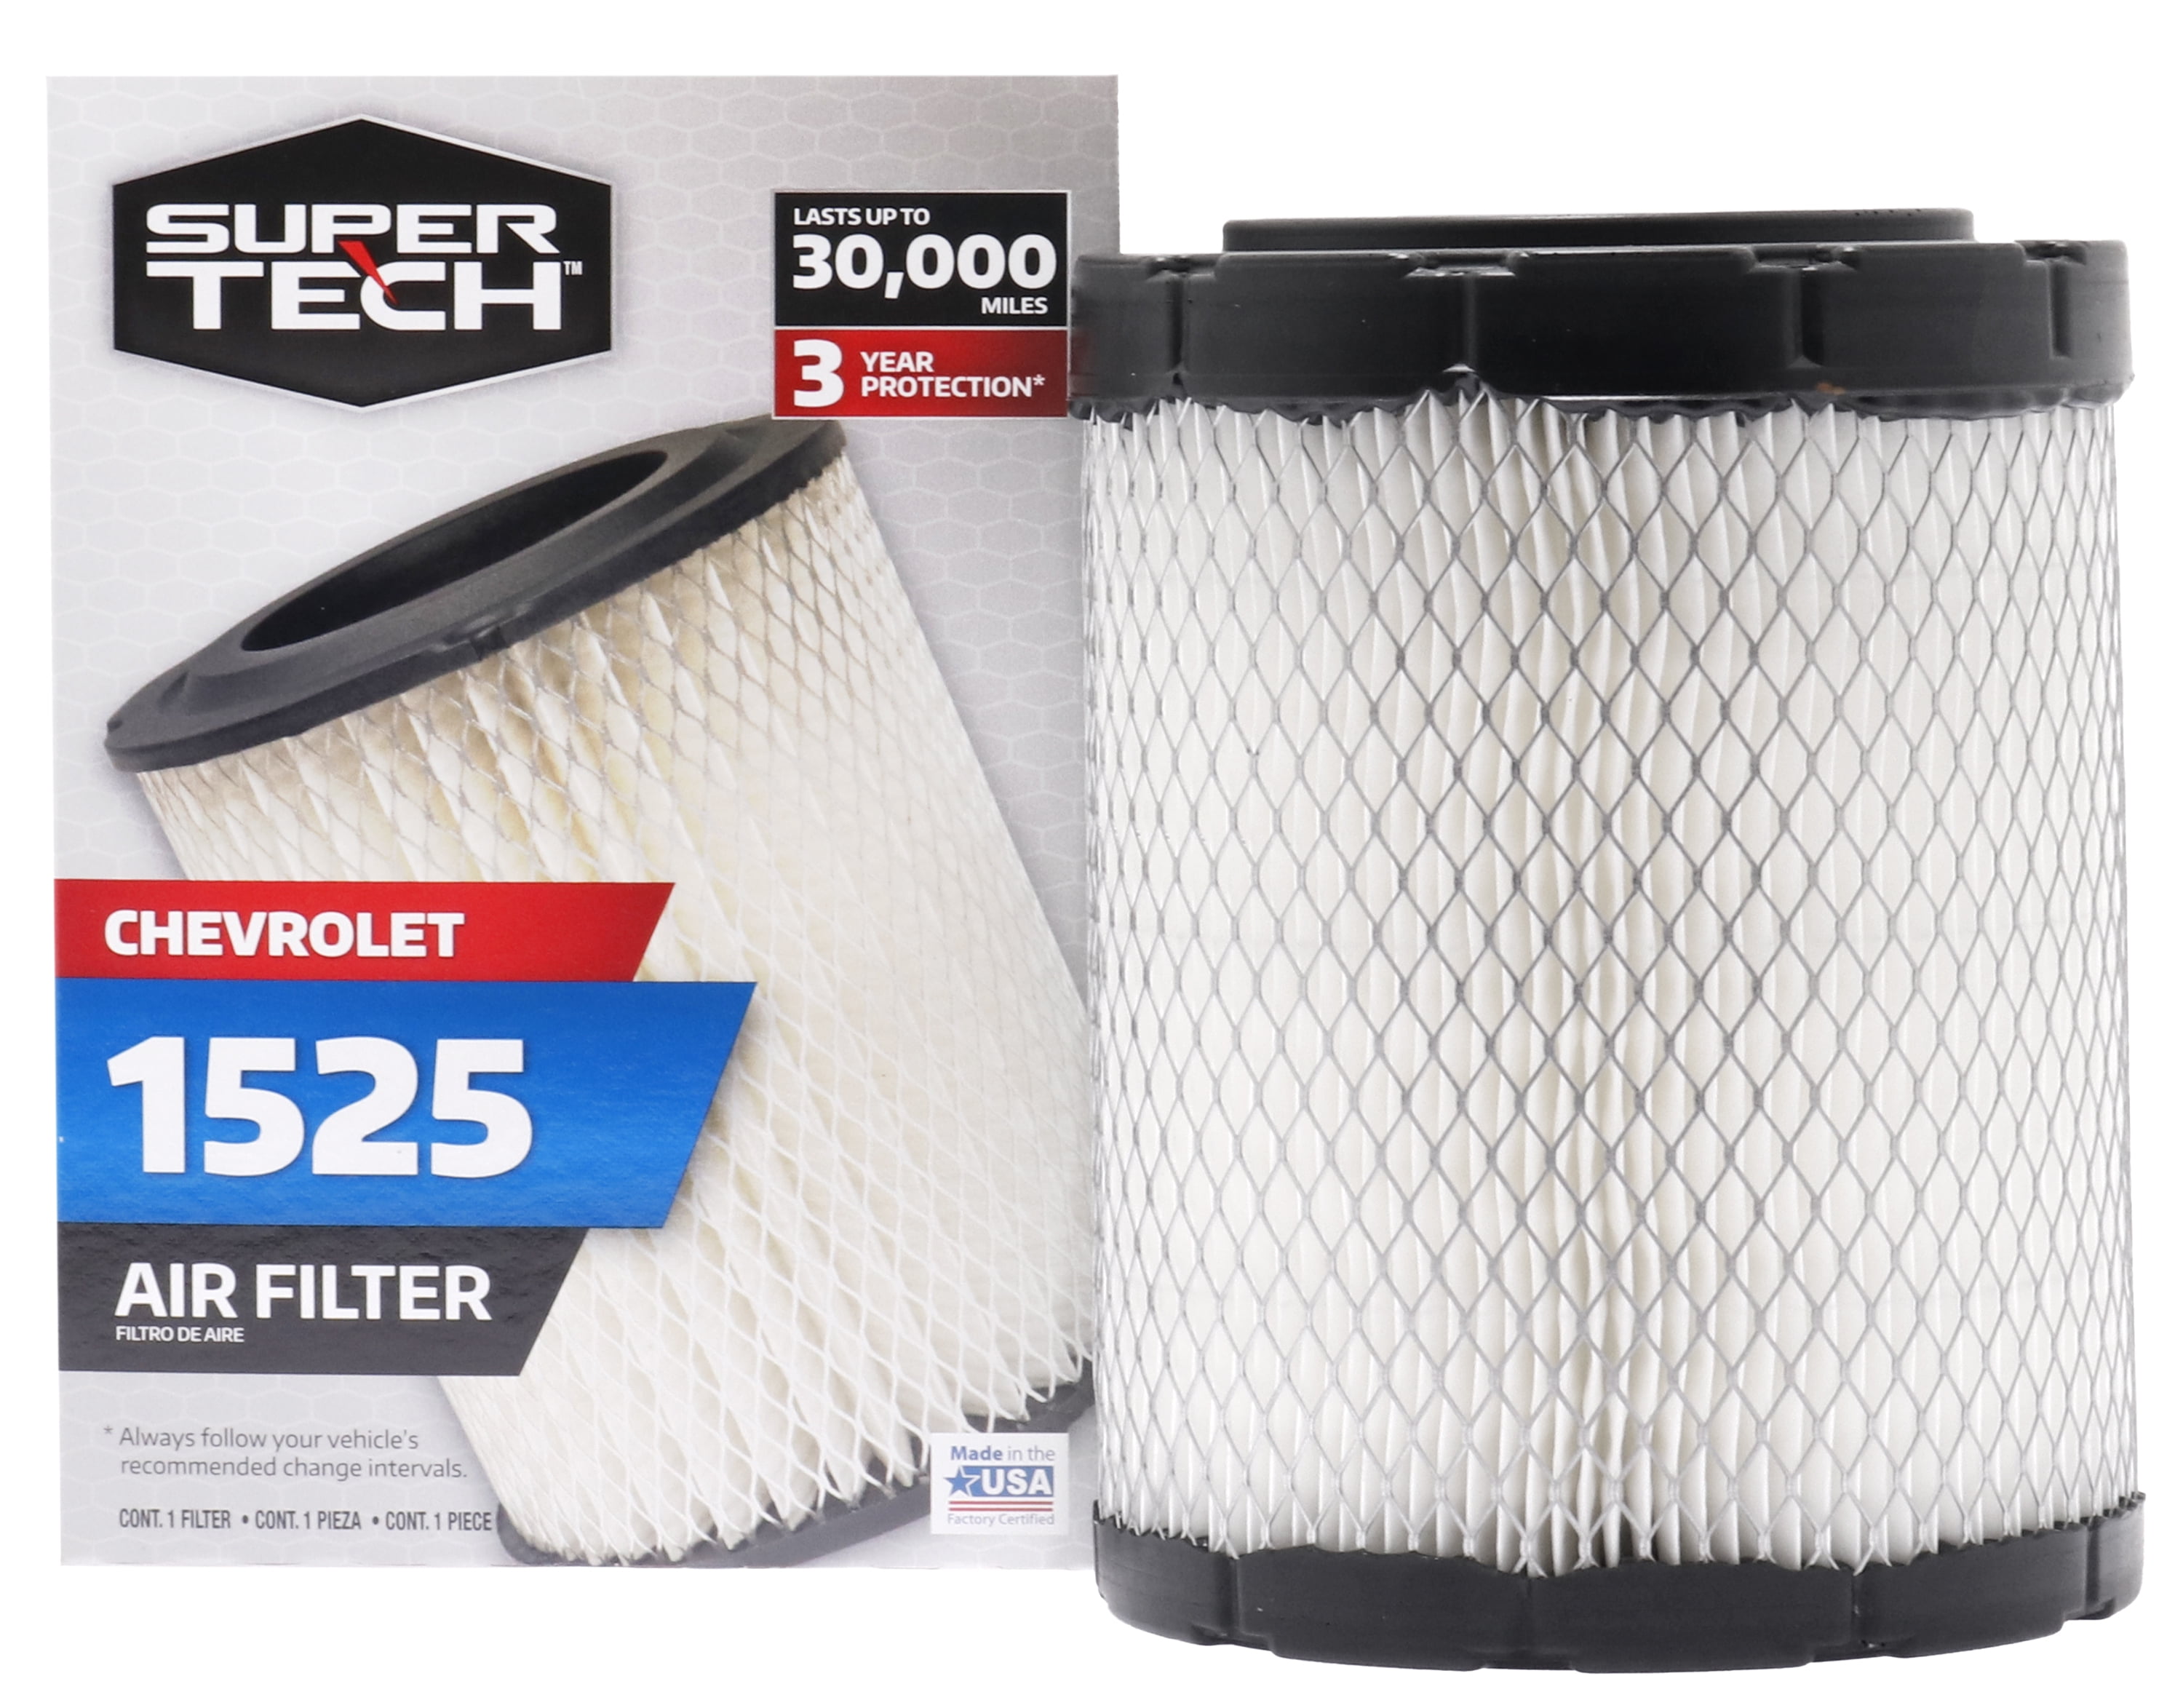 SuperTech 1525 Engine Air Filter, Replacement for GM and Chevrolet